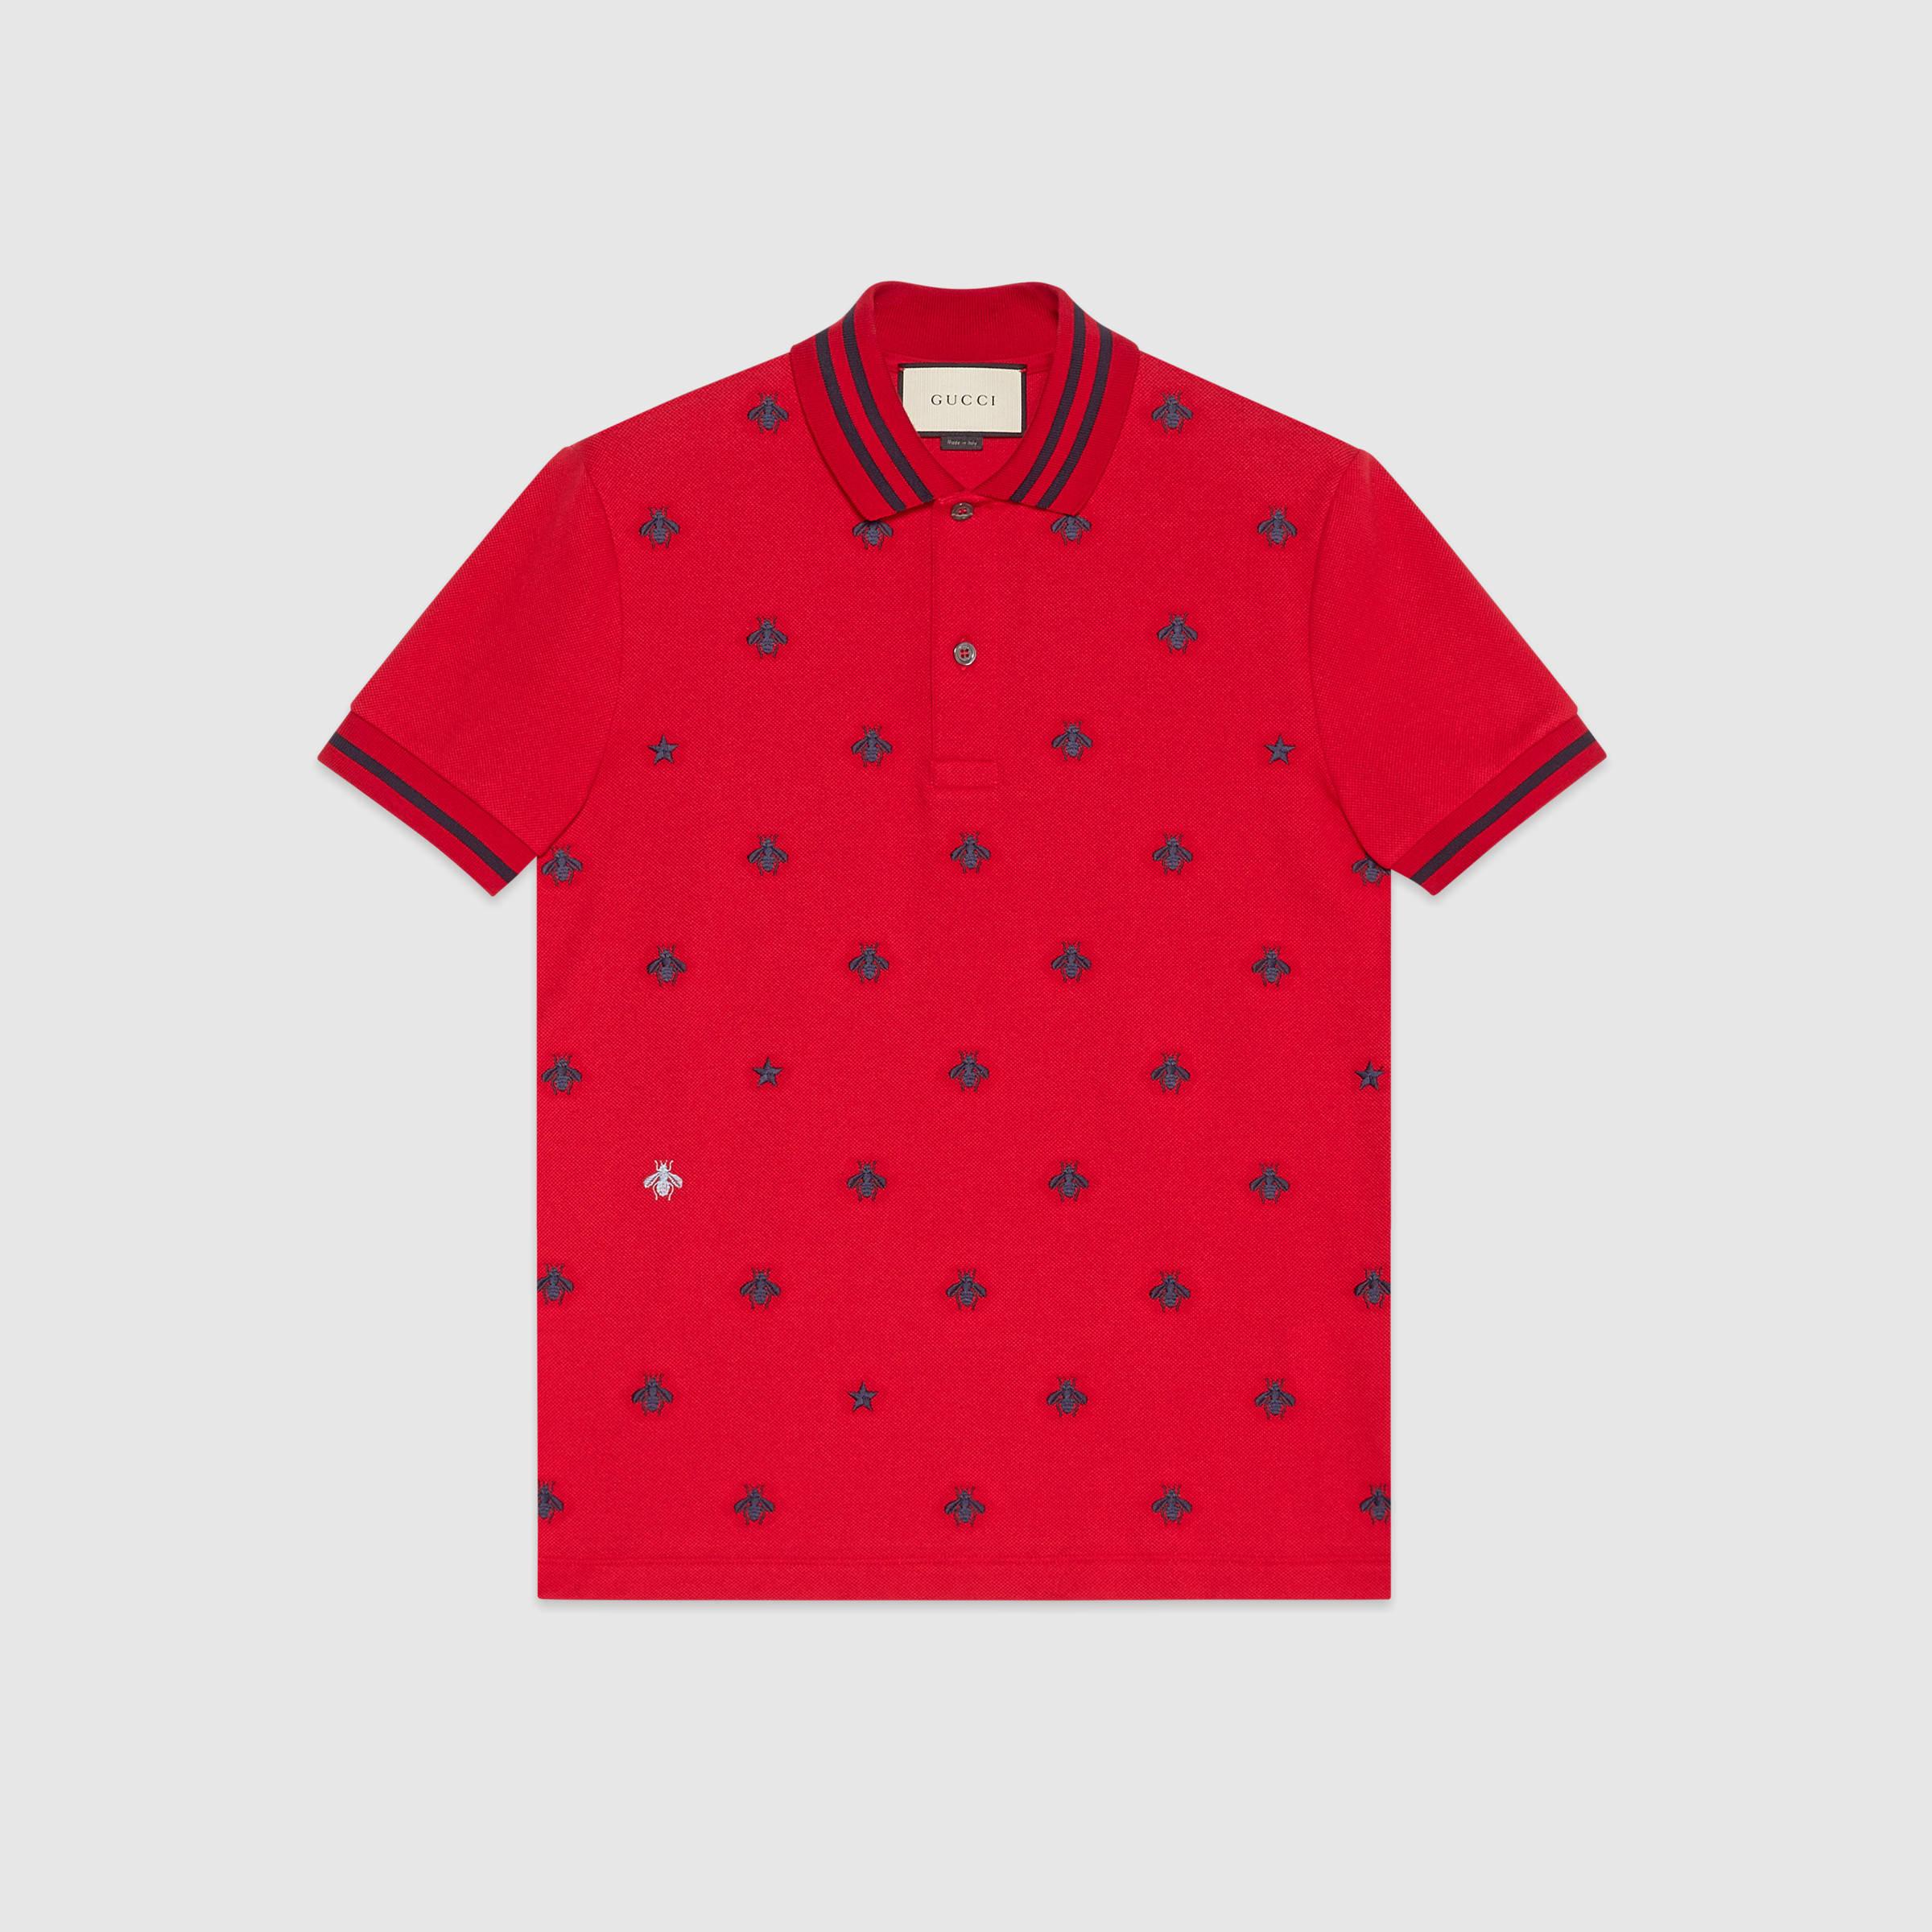 AJh,gucci cotton polo with bees stars,hrdsindia.org